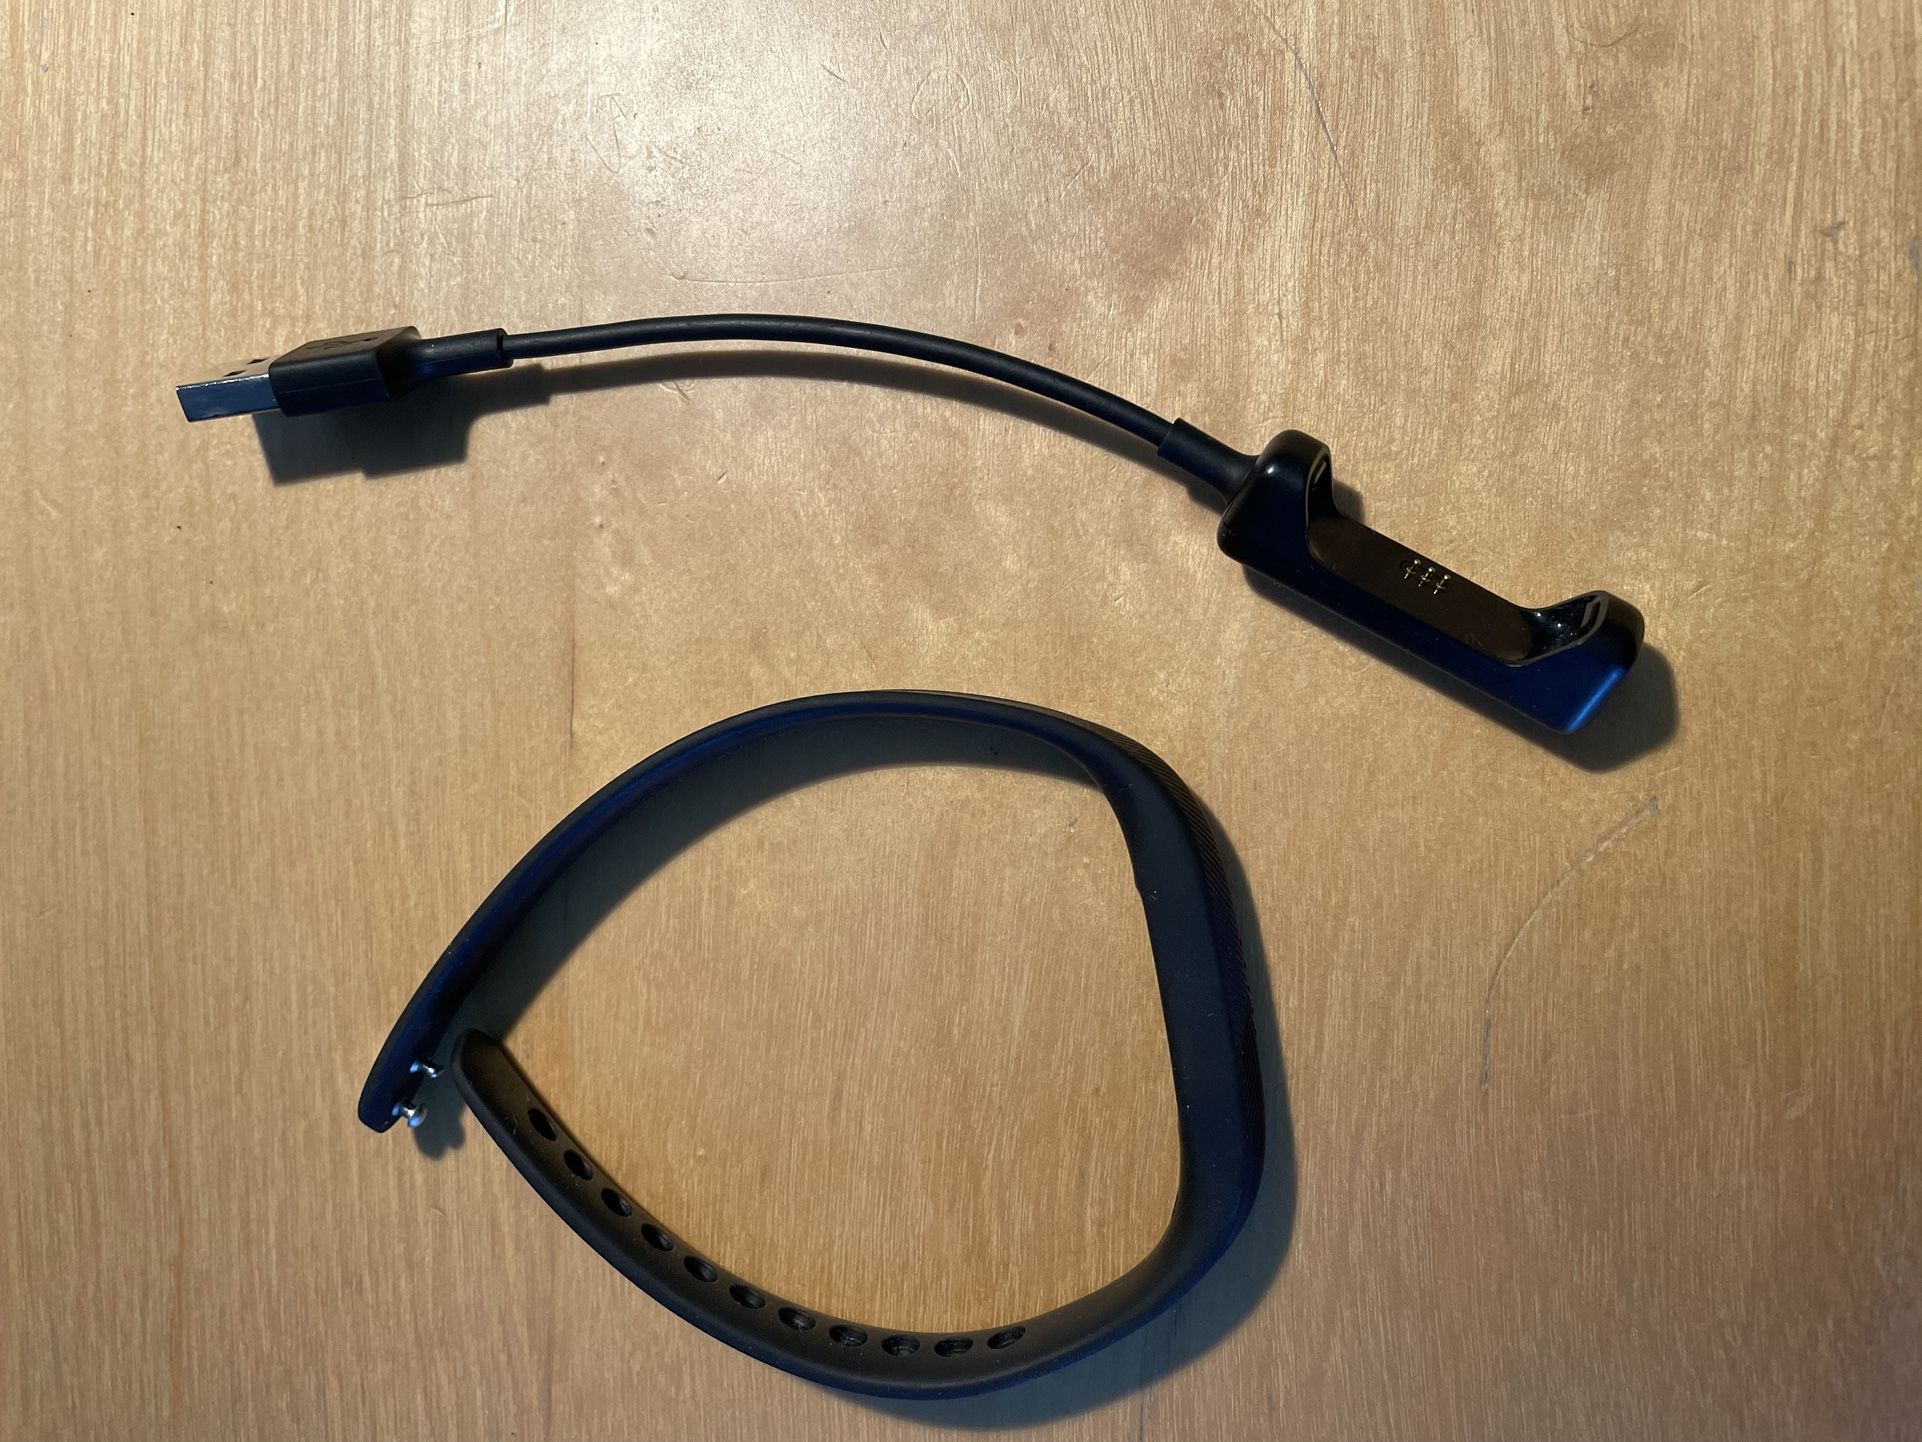 Fitbit Flex Charger and Band